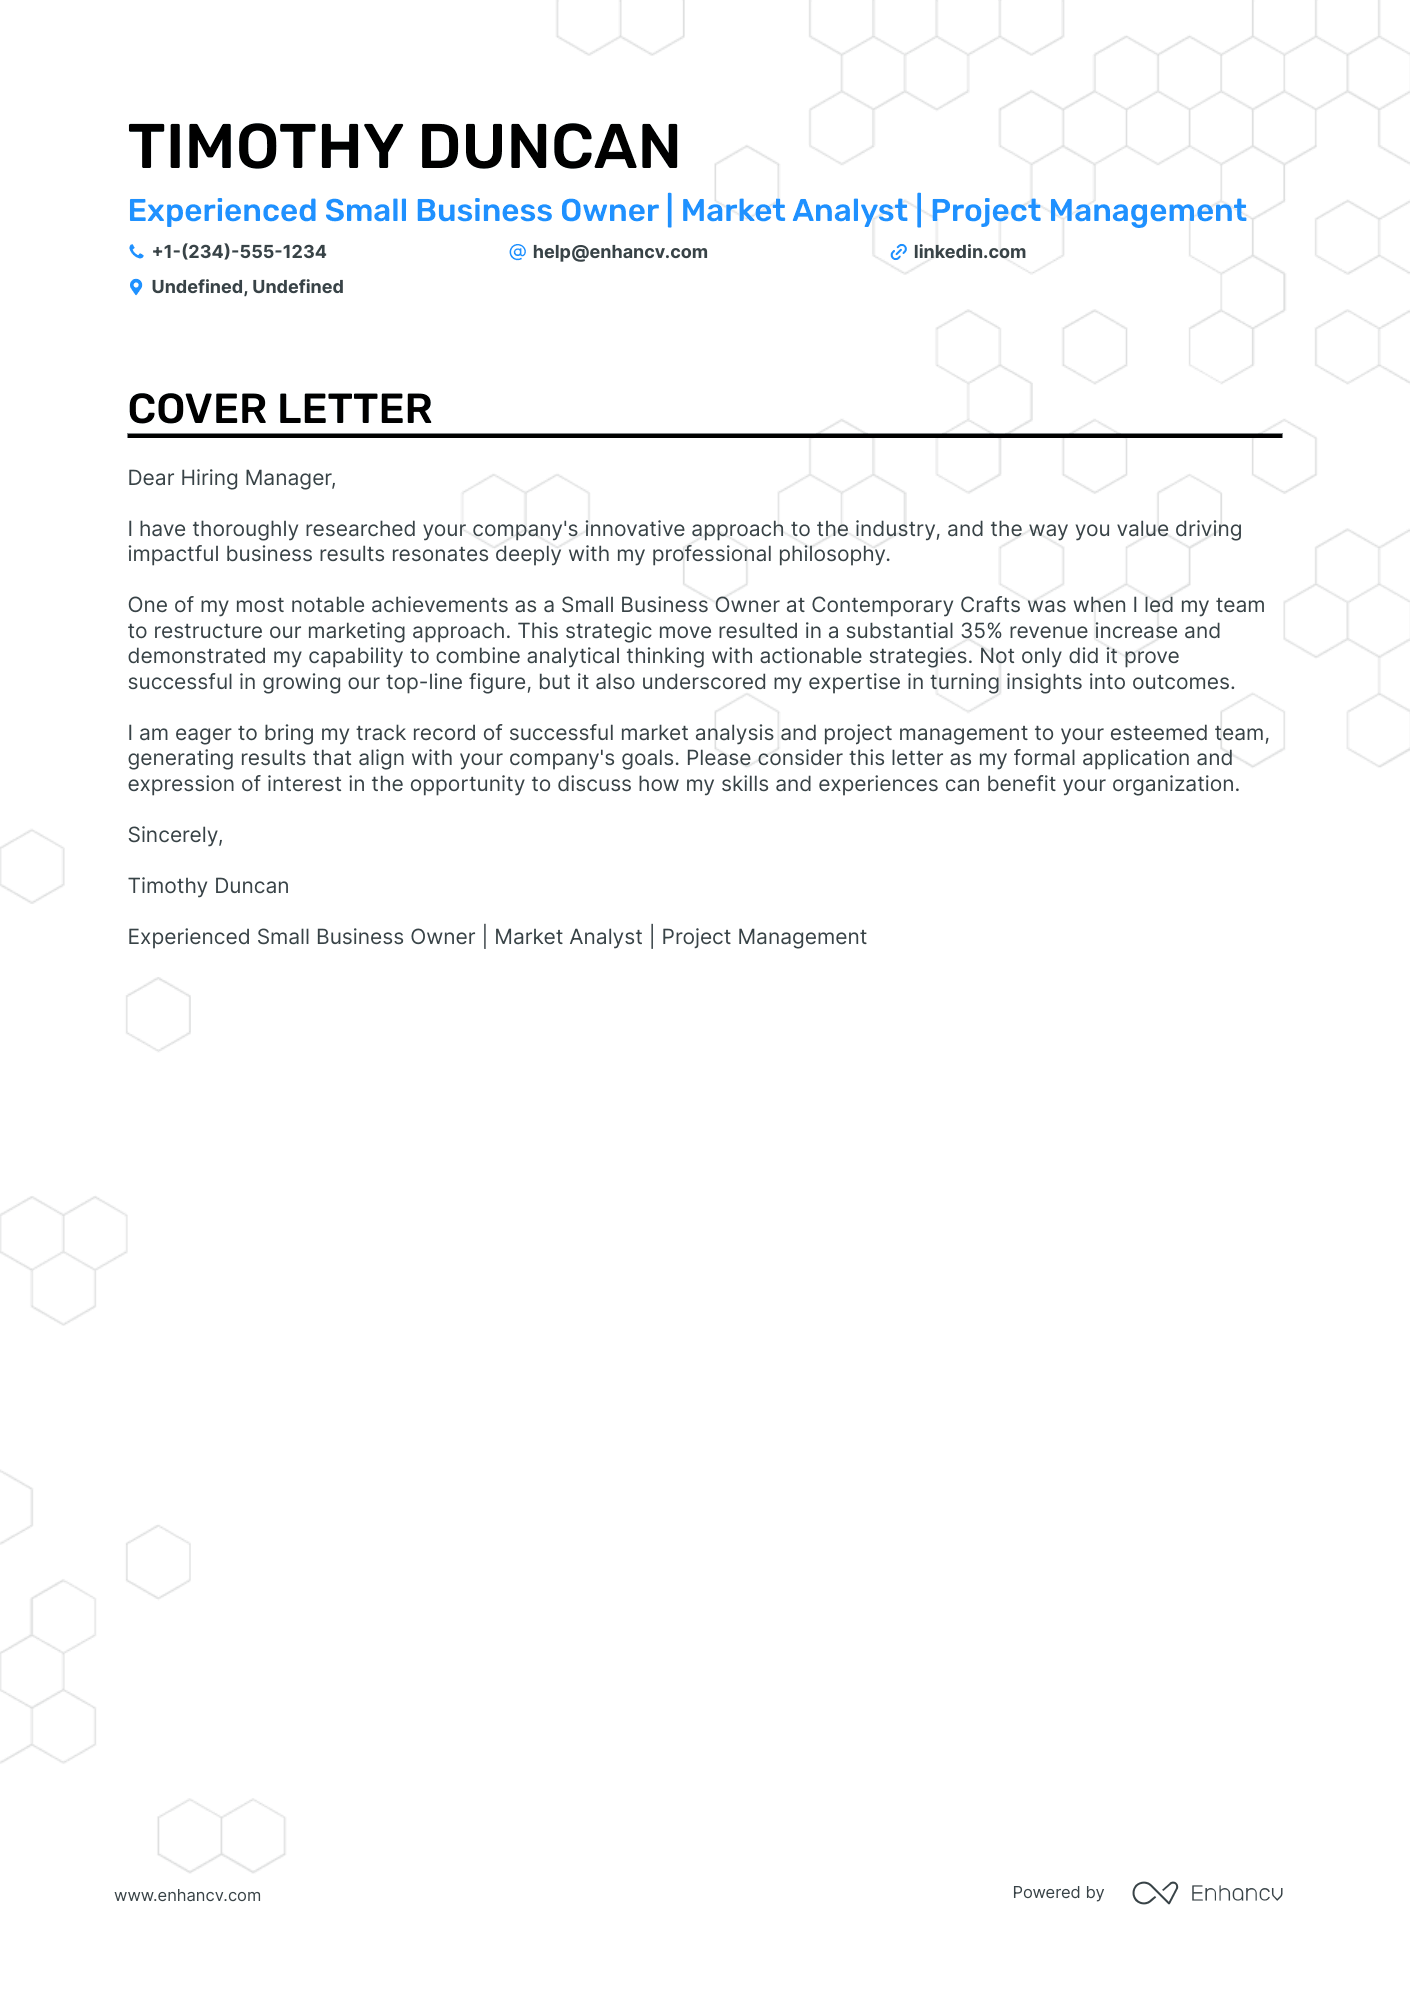 Small Business Owner cover letter